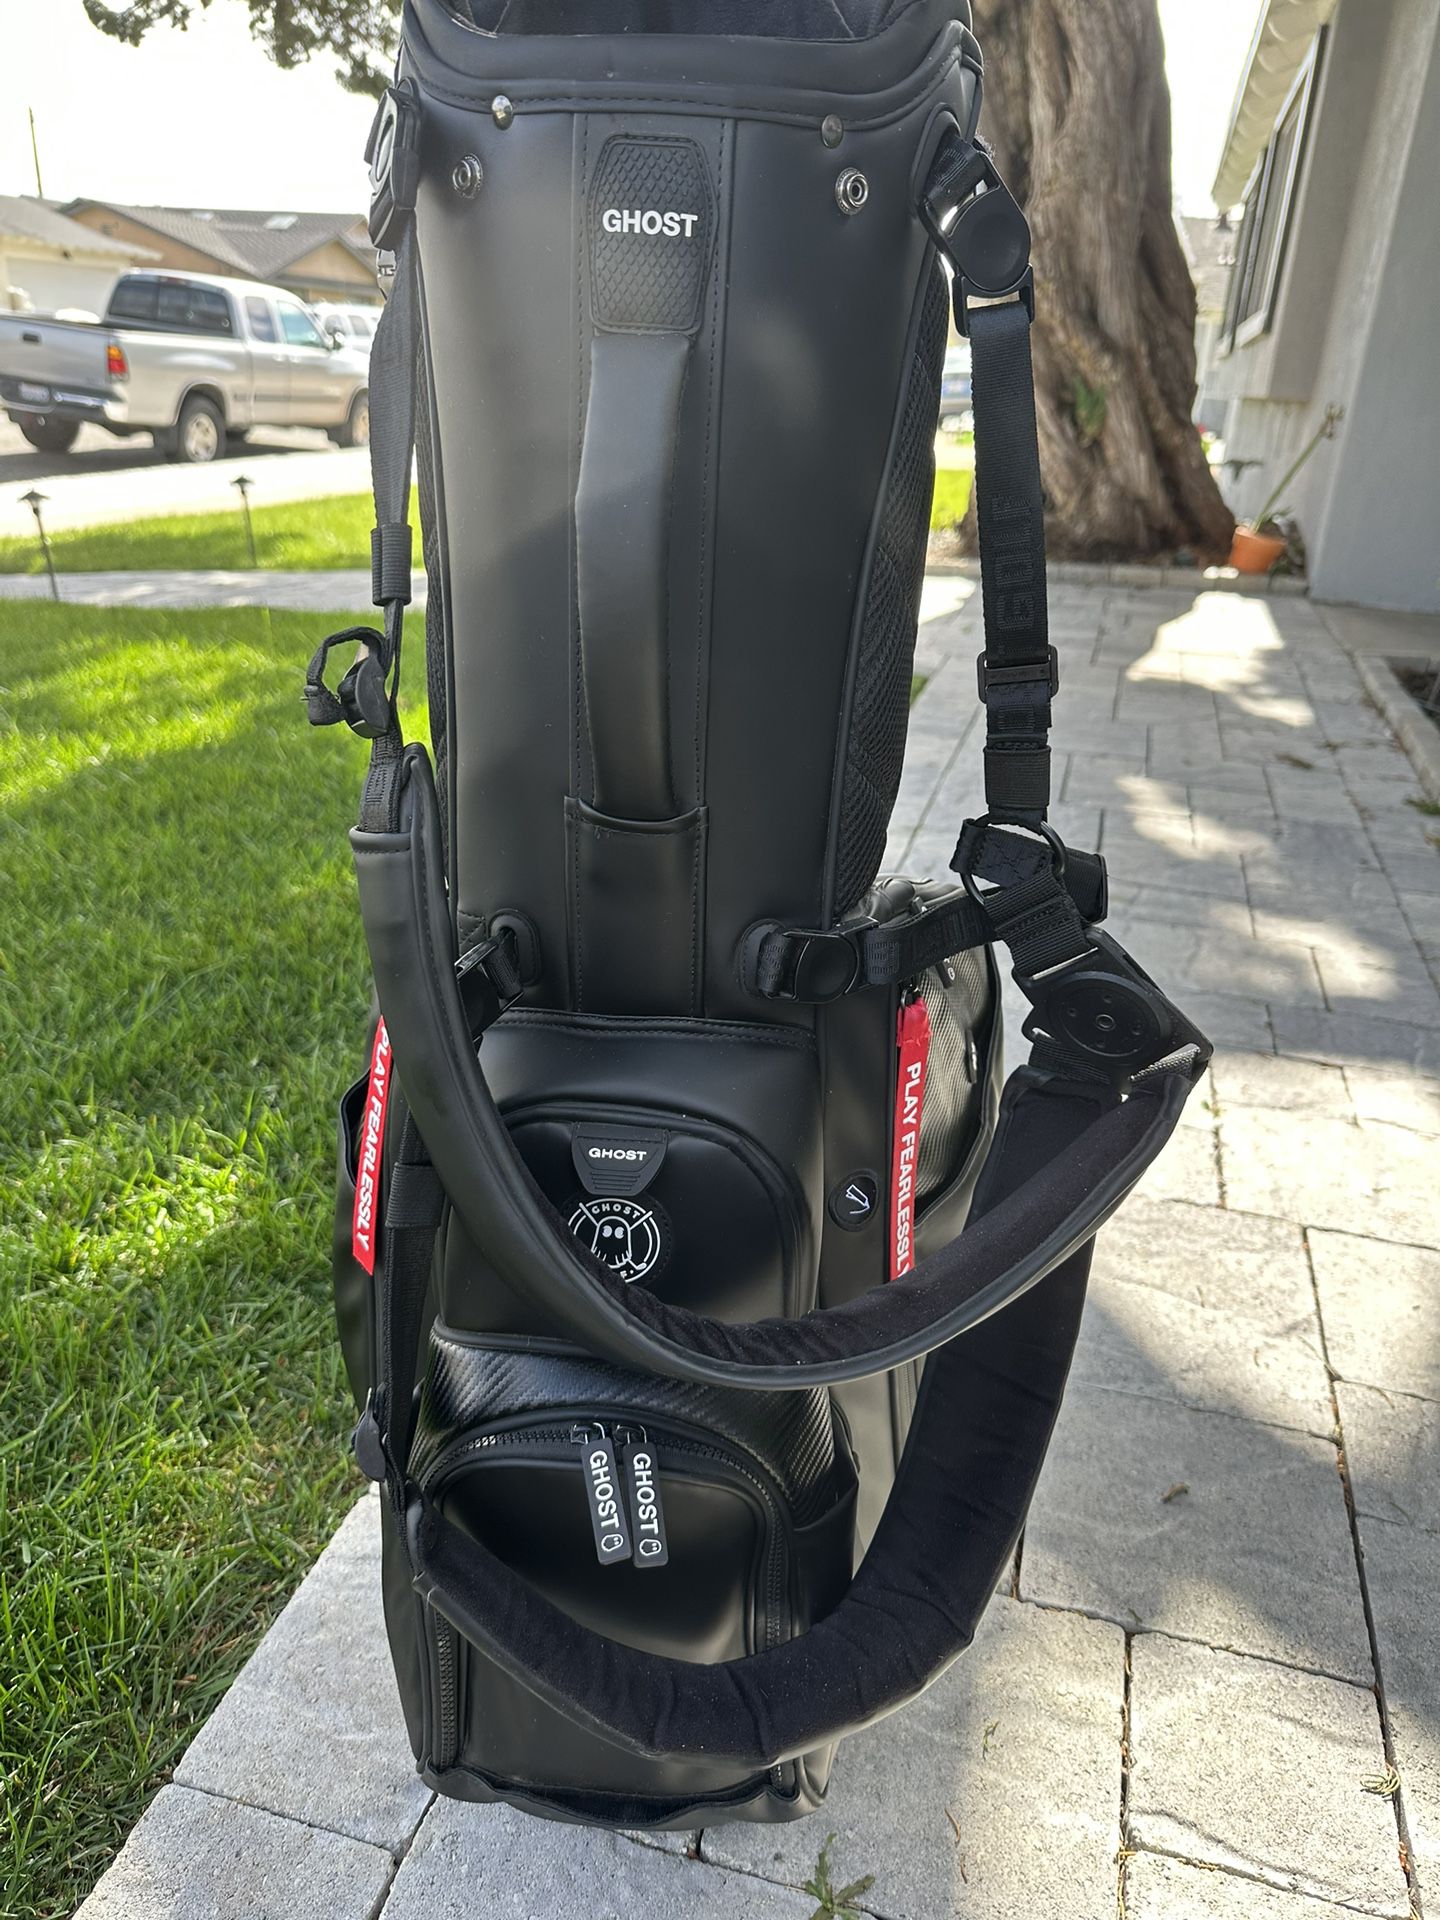 Ghost Golf 14 Way Stand Bag for Sale in Thousand Oaks, CA - OfferUp